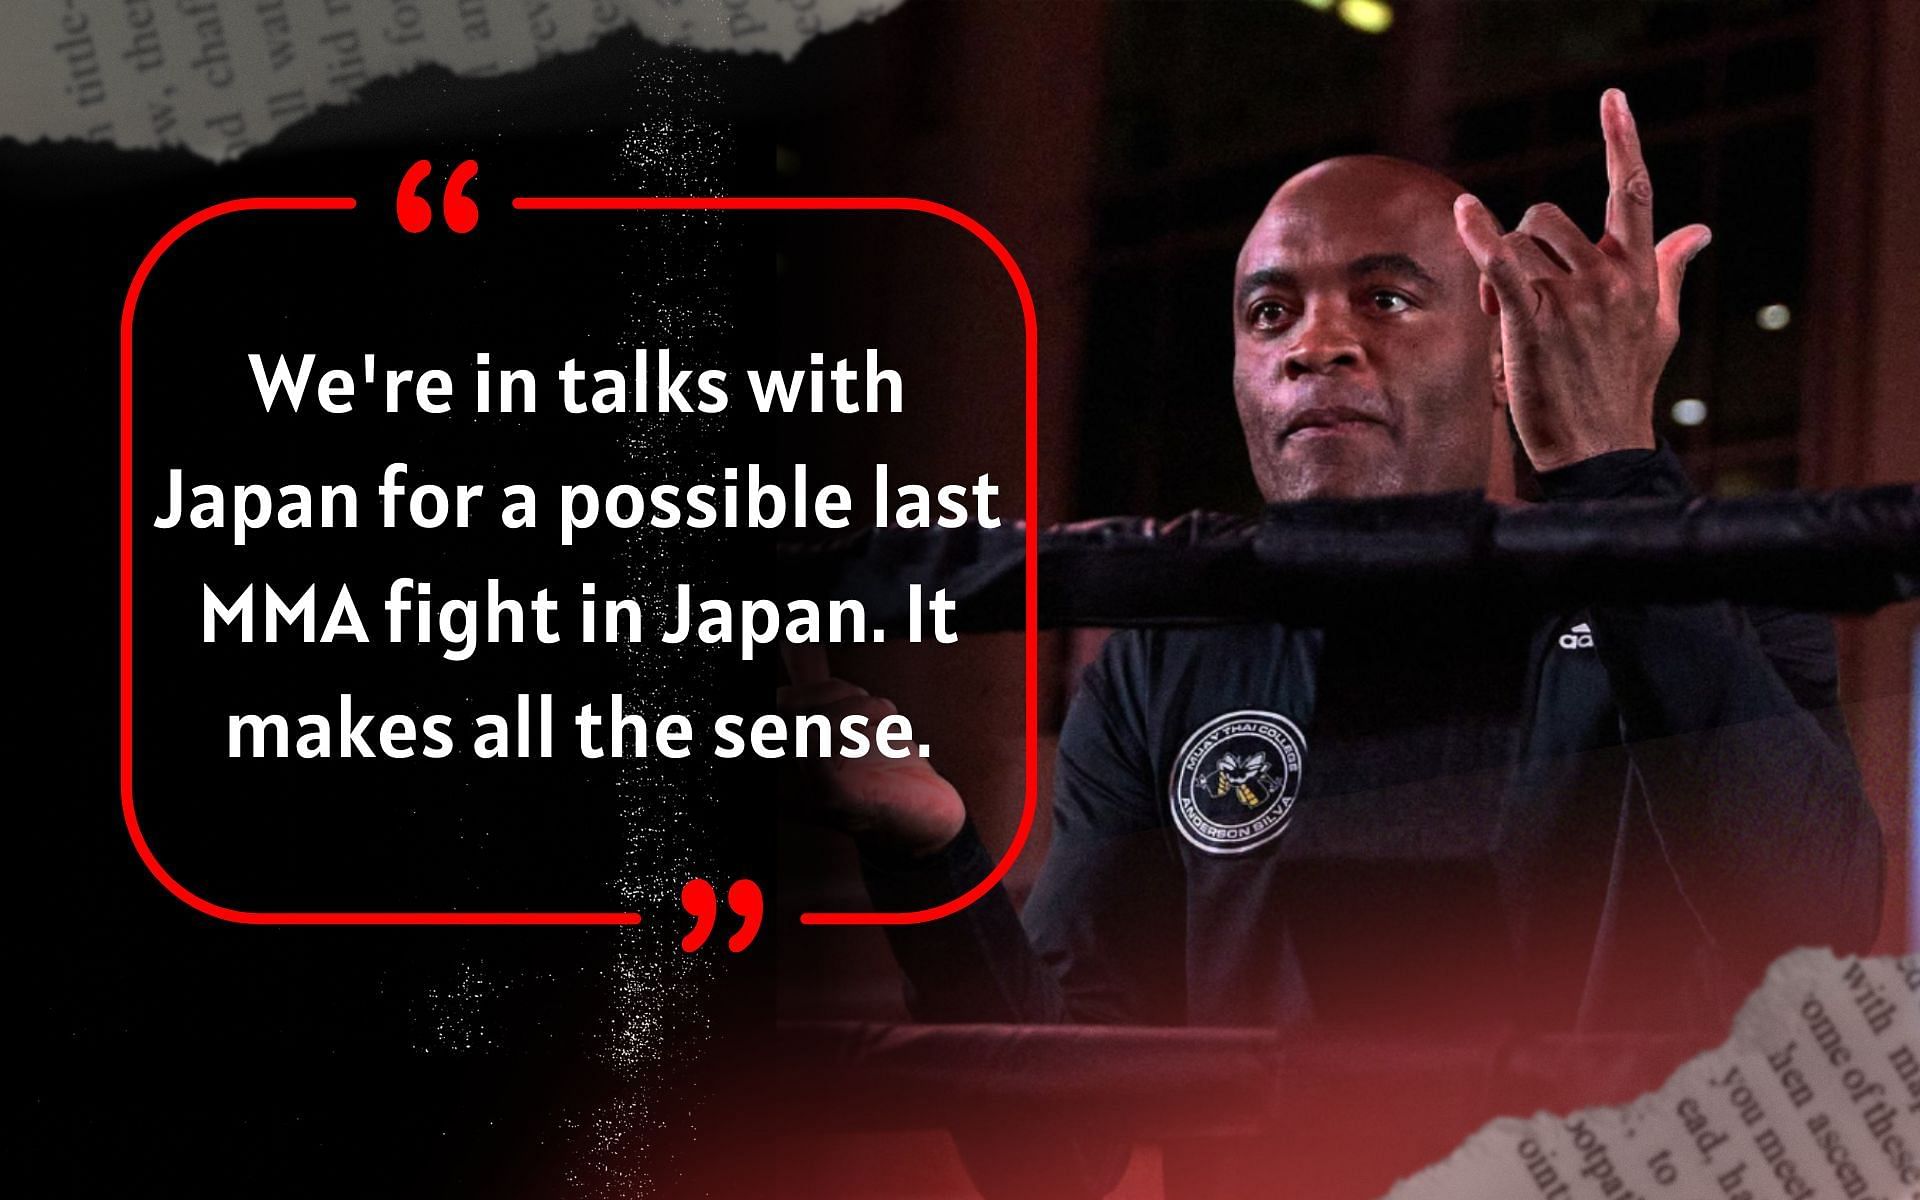 Anderson Silva want his final fight in Japan [Image credits: @mmafighting on Instagram]